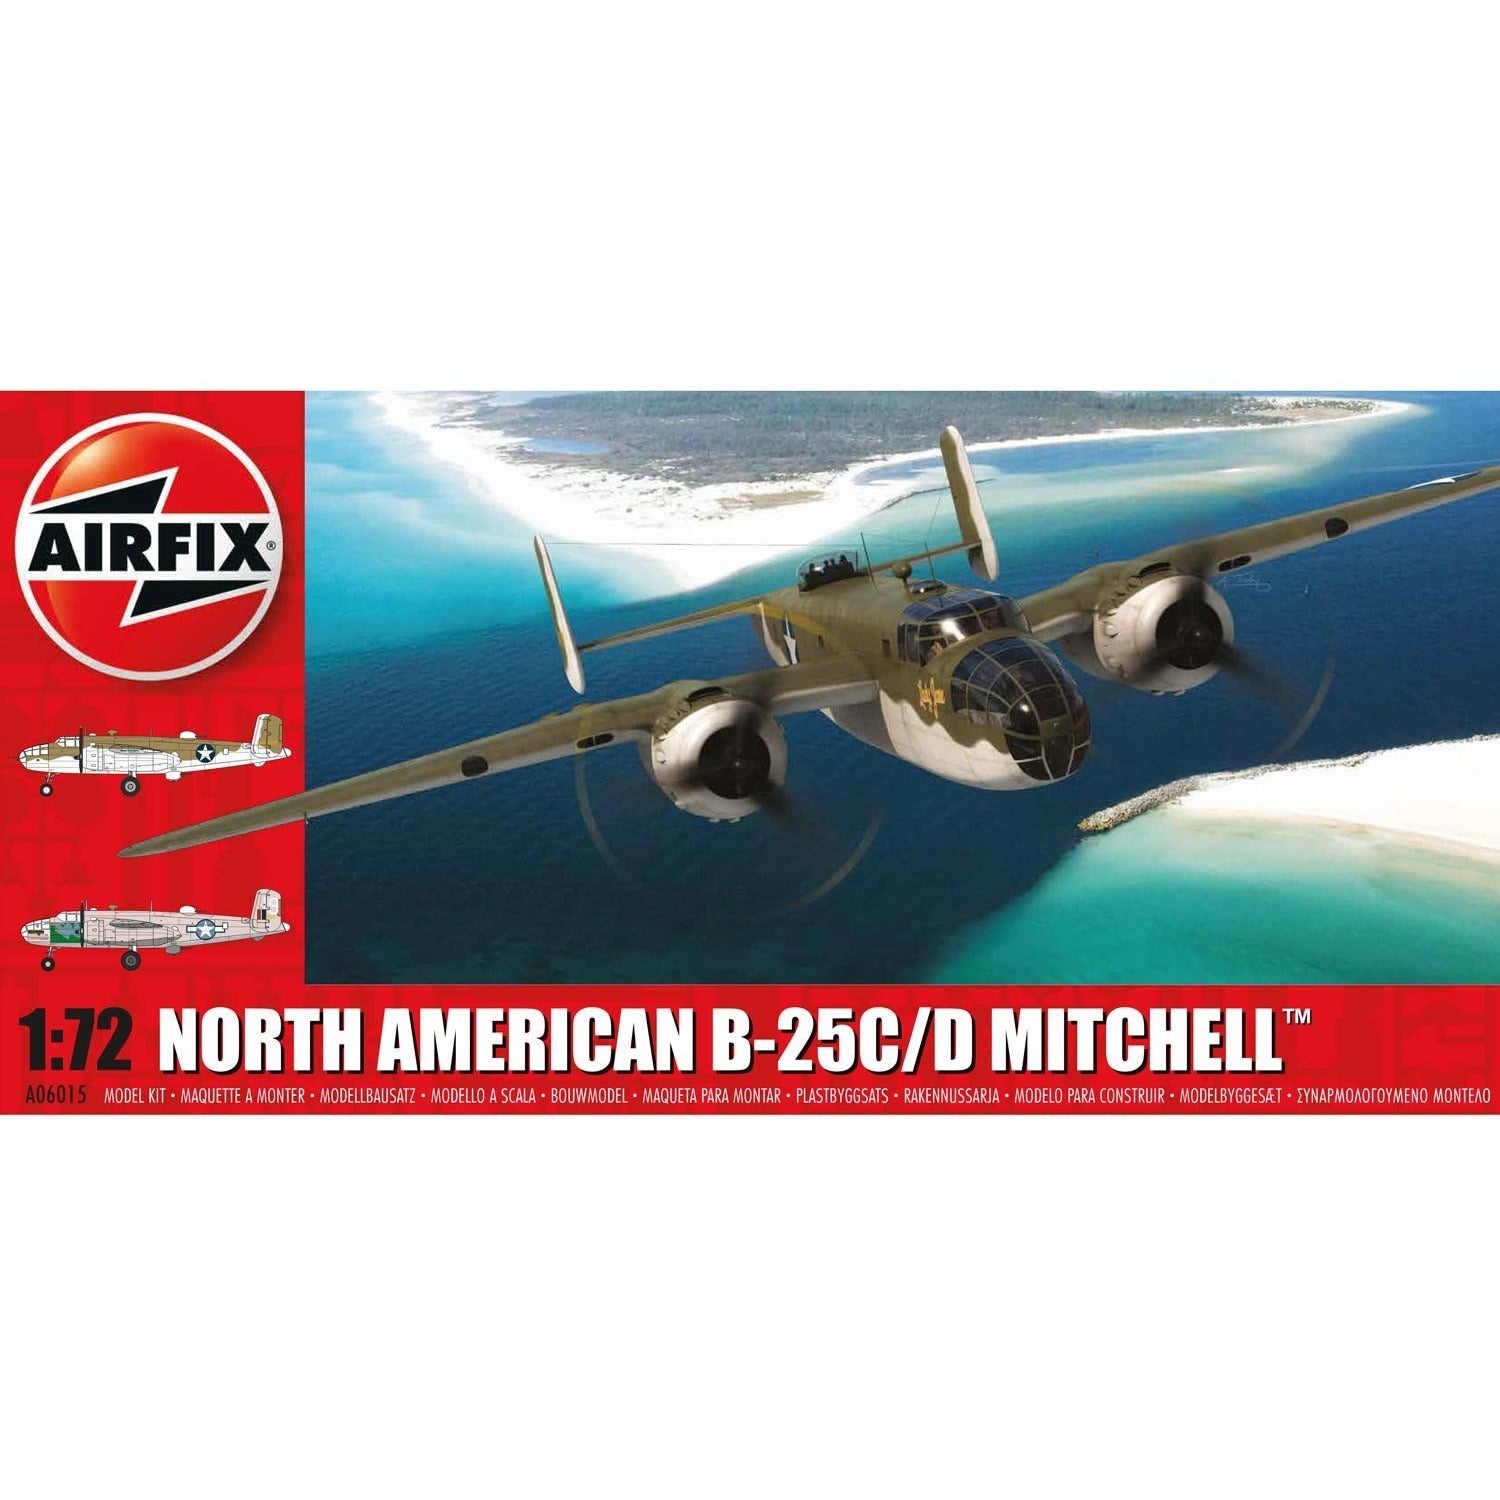 North American B-25C/D Mitchell 1/72 by Airfix